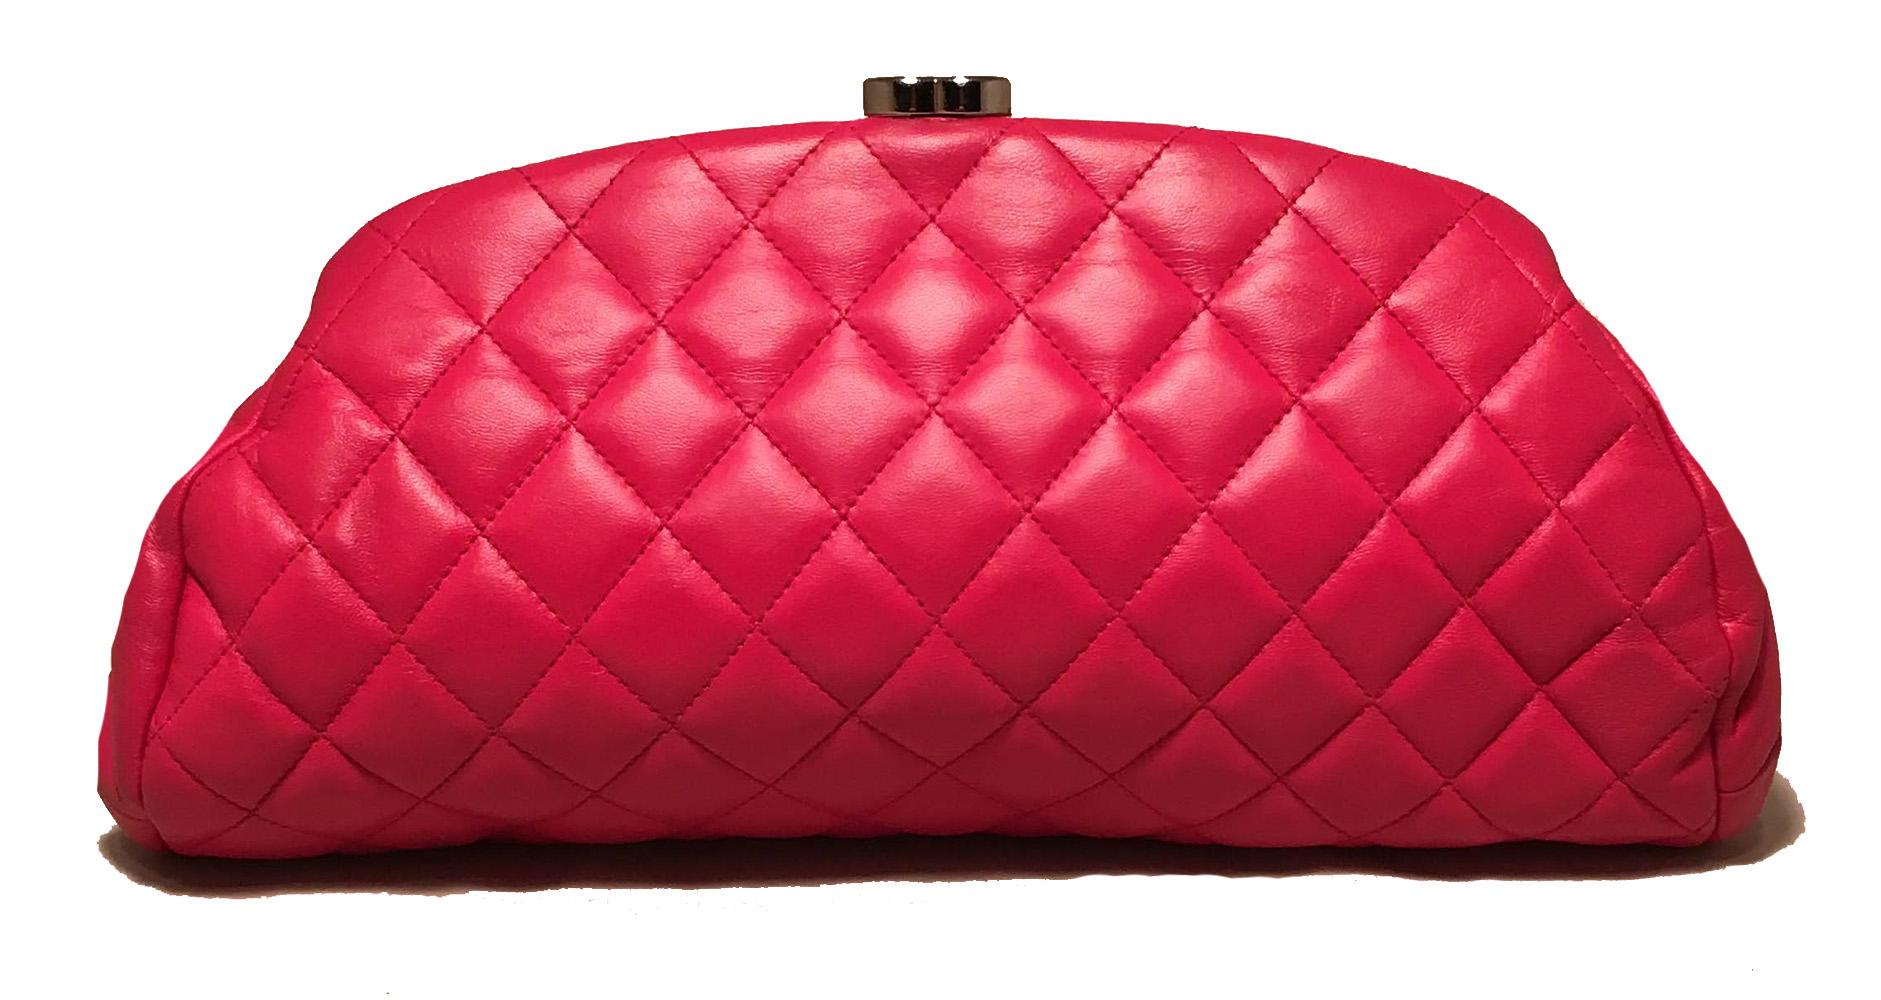 Chanel Dark Pink Quilted Leather Timeless Clutch in excellent condition. Dark pink quilted lambskin leather exterior. Lifting silver CC logo closure opens to a dark pink satin lined interior that holds one side zippered pocket. Overall excellent